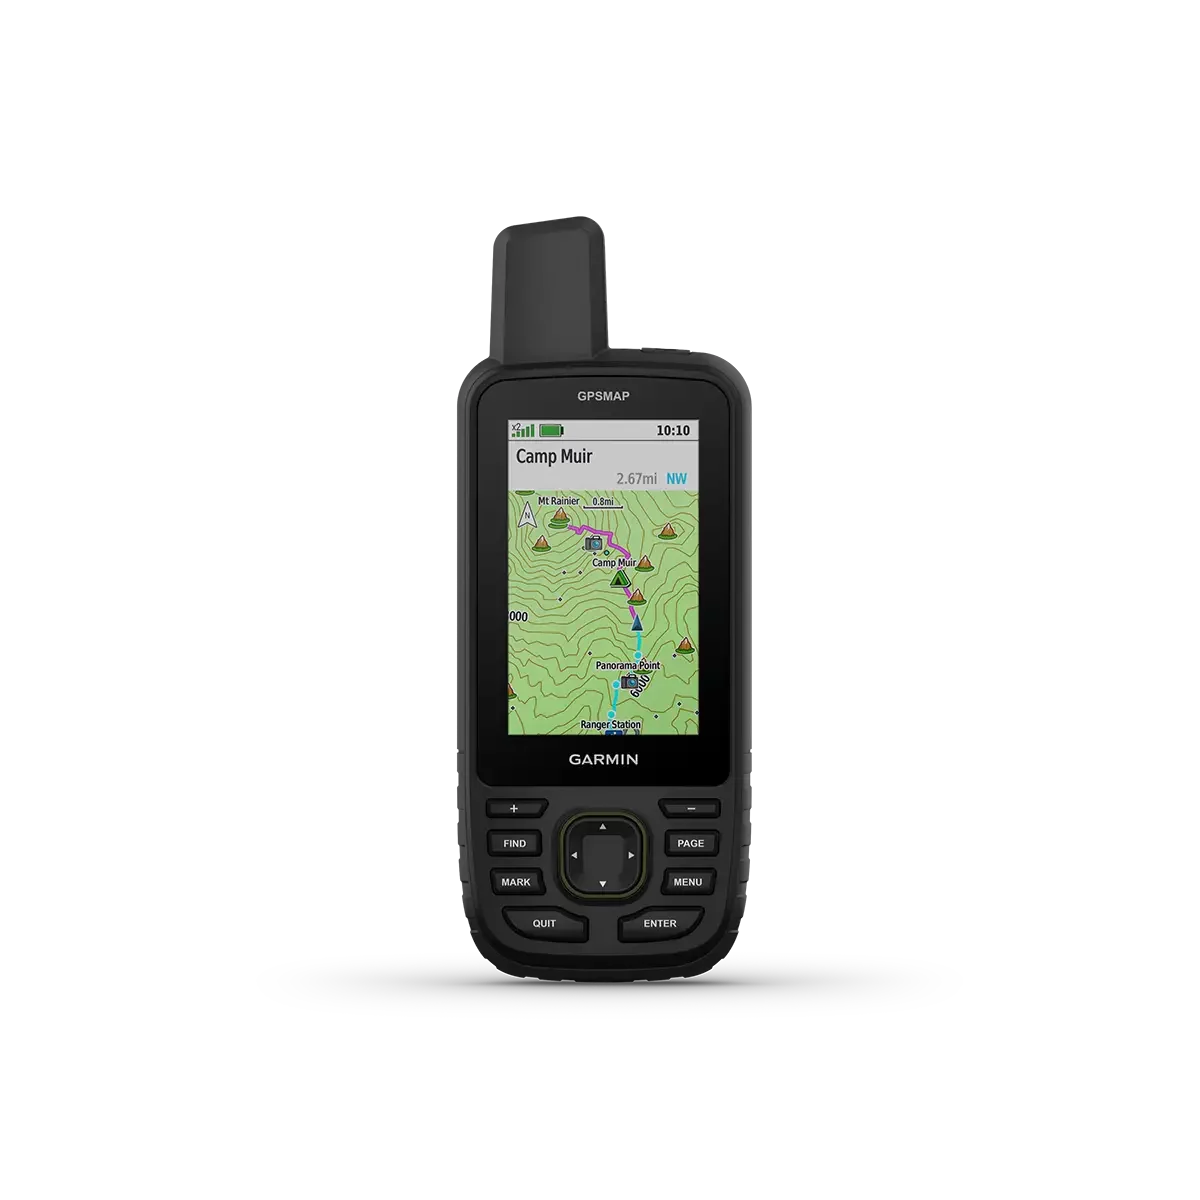 Garmin GPSMAP 67 with map and navigation screen